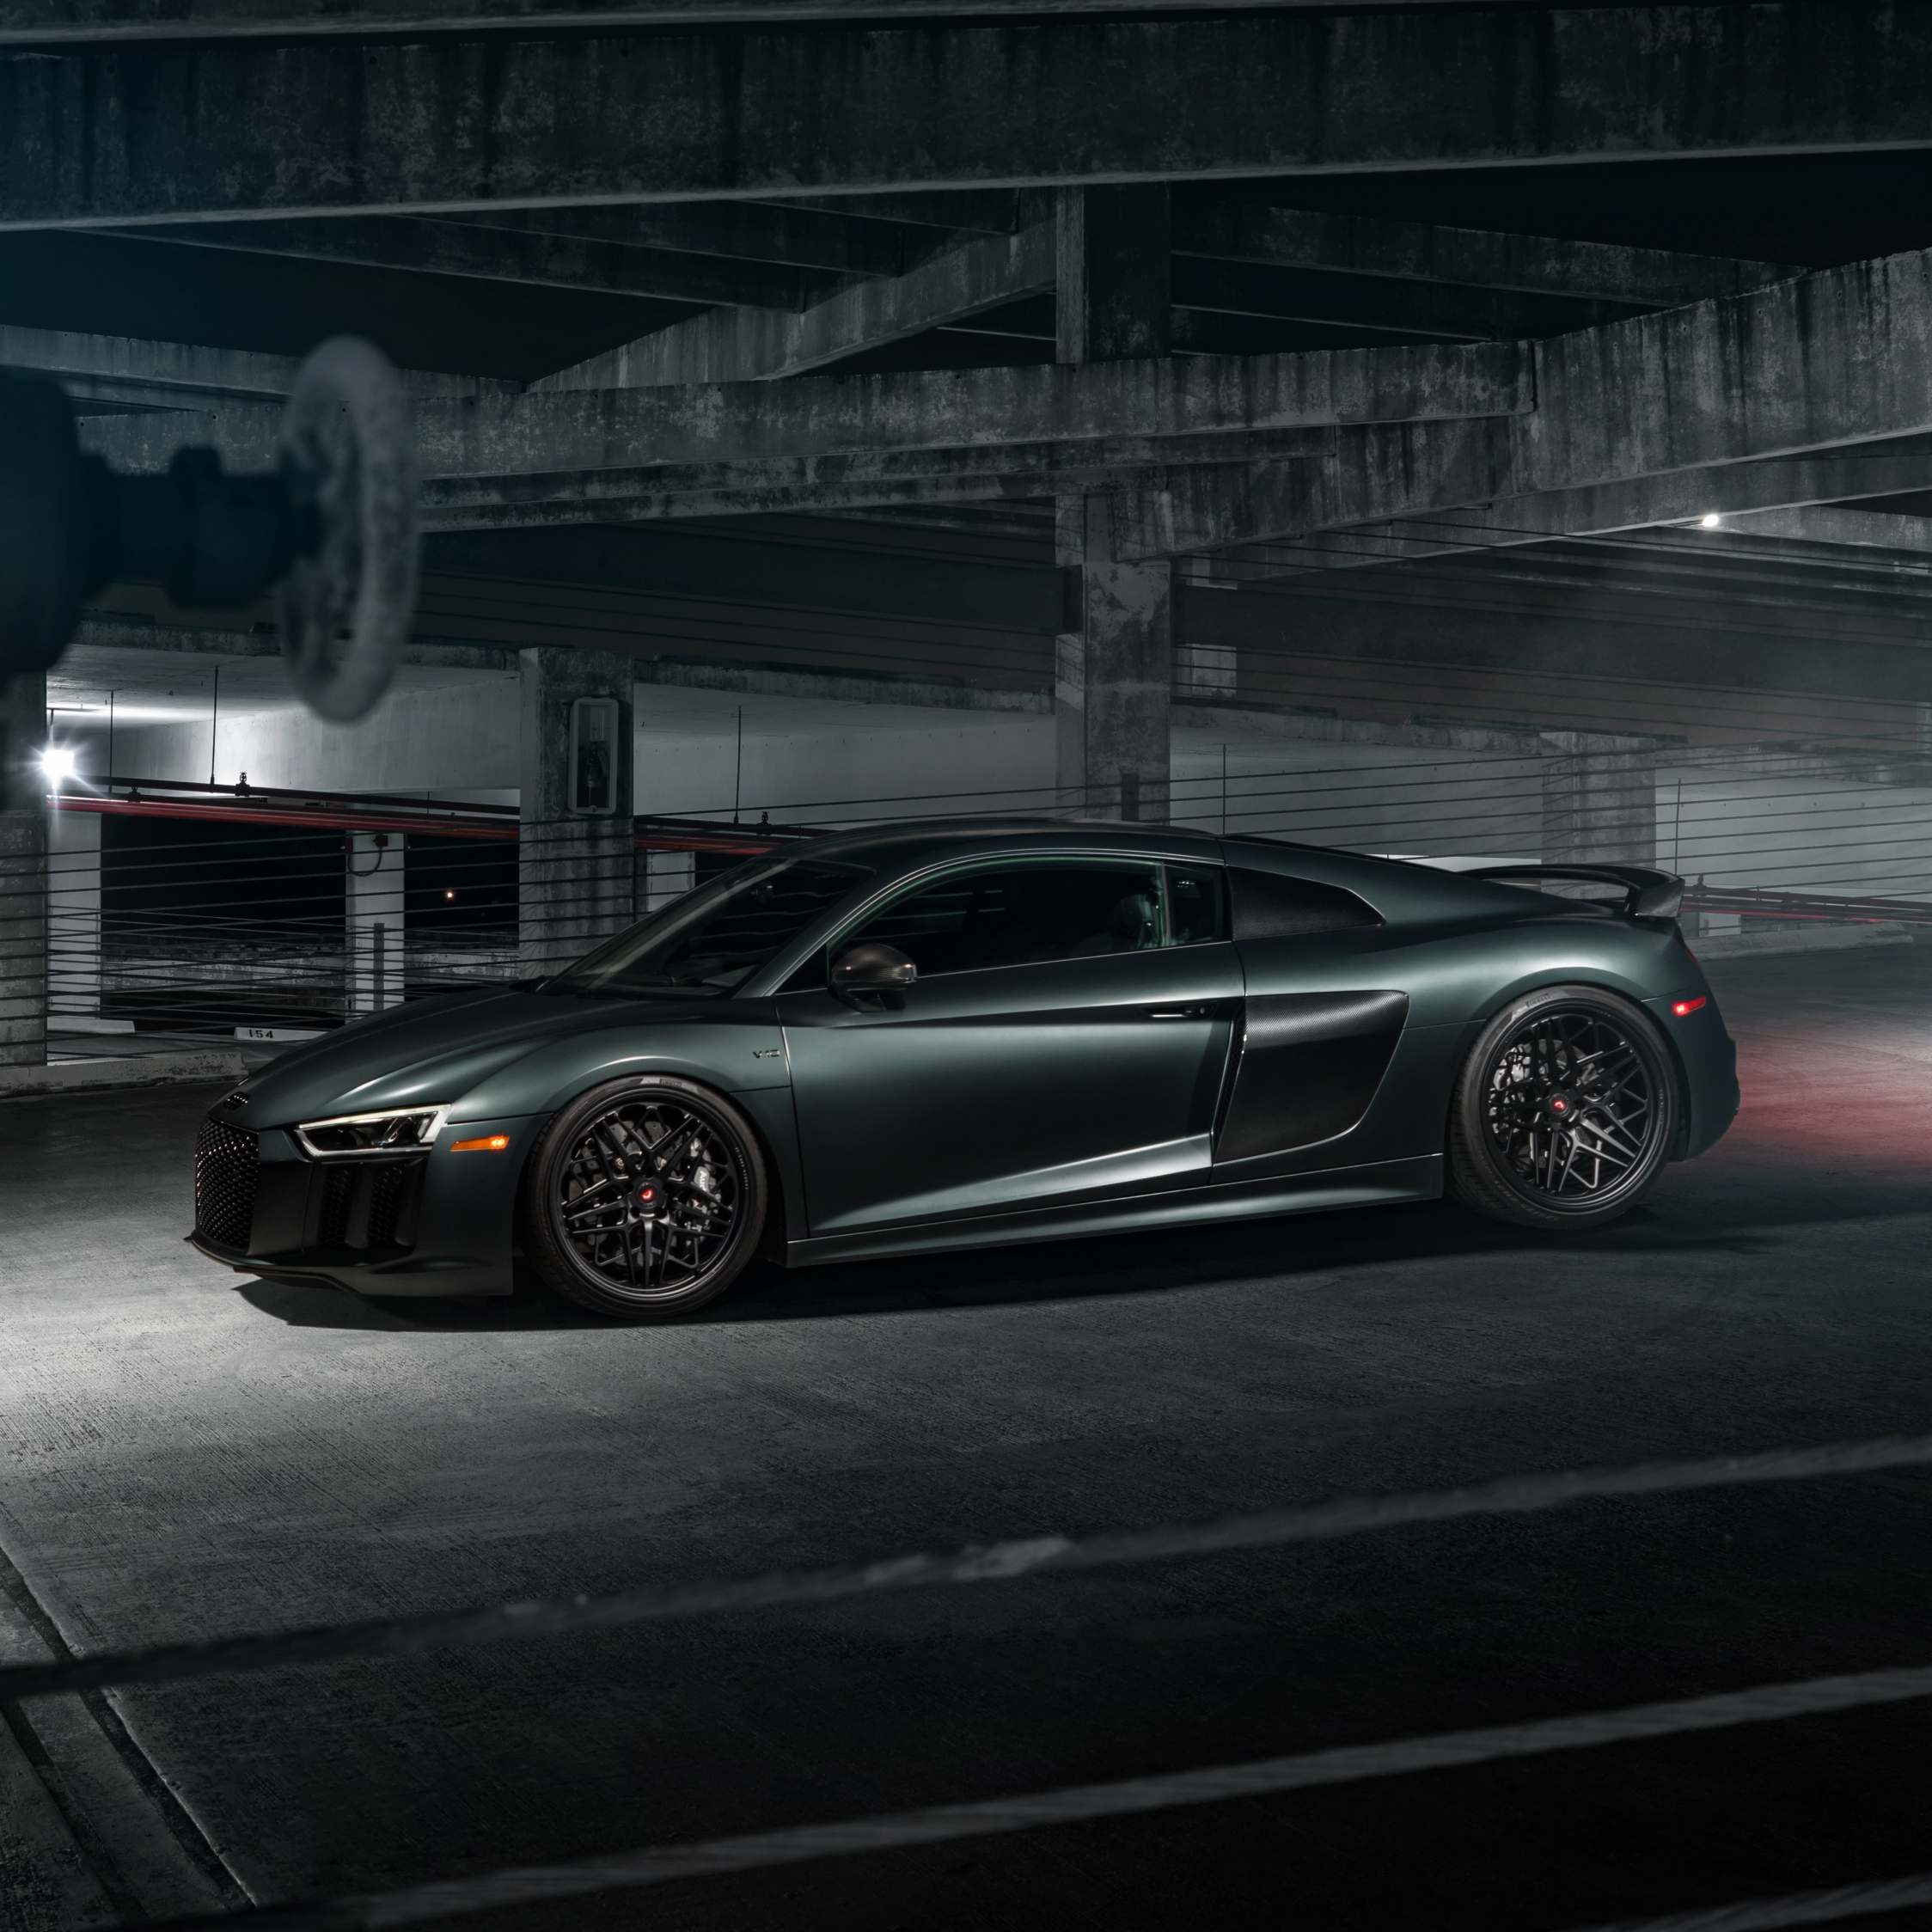 Download 2248x2248 Wallpaper 18 Parked In Basement Audi R8 Ipad Air Ipad Air 2 Ipad 3 Ipad 4 Ipad Mini 2 Ipad Mini 3 2248x2248 Hd Image Background 43